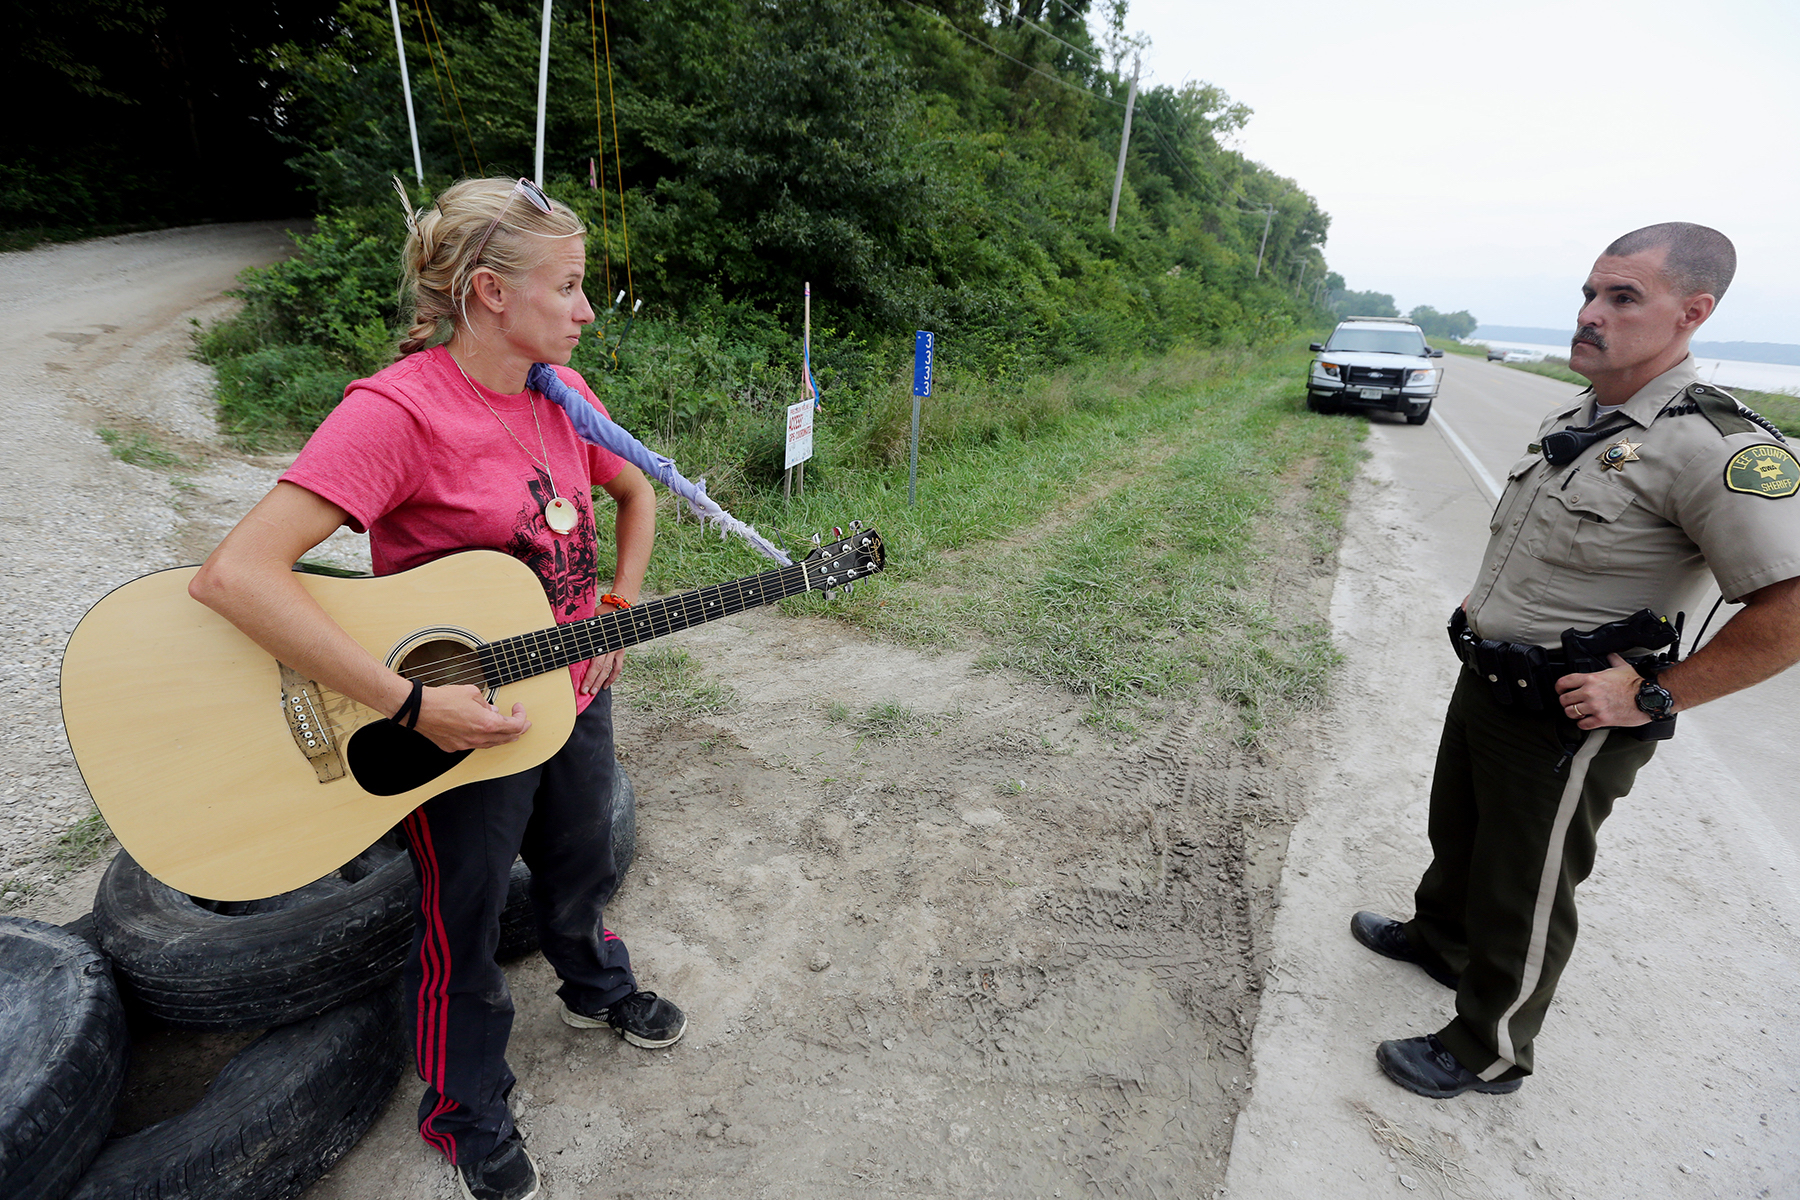 Jessica Reznicek, holding an acoustic guitar, stares at a uniformed officer while standing near a tree-lined road